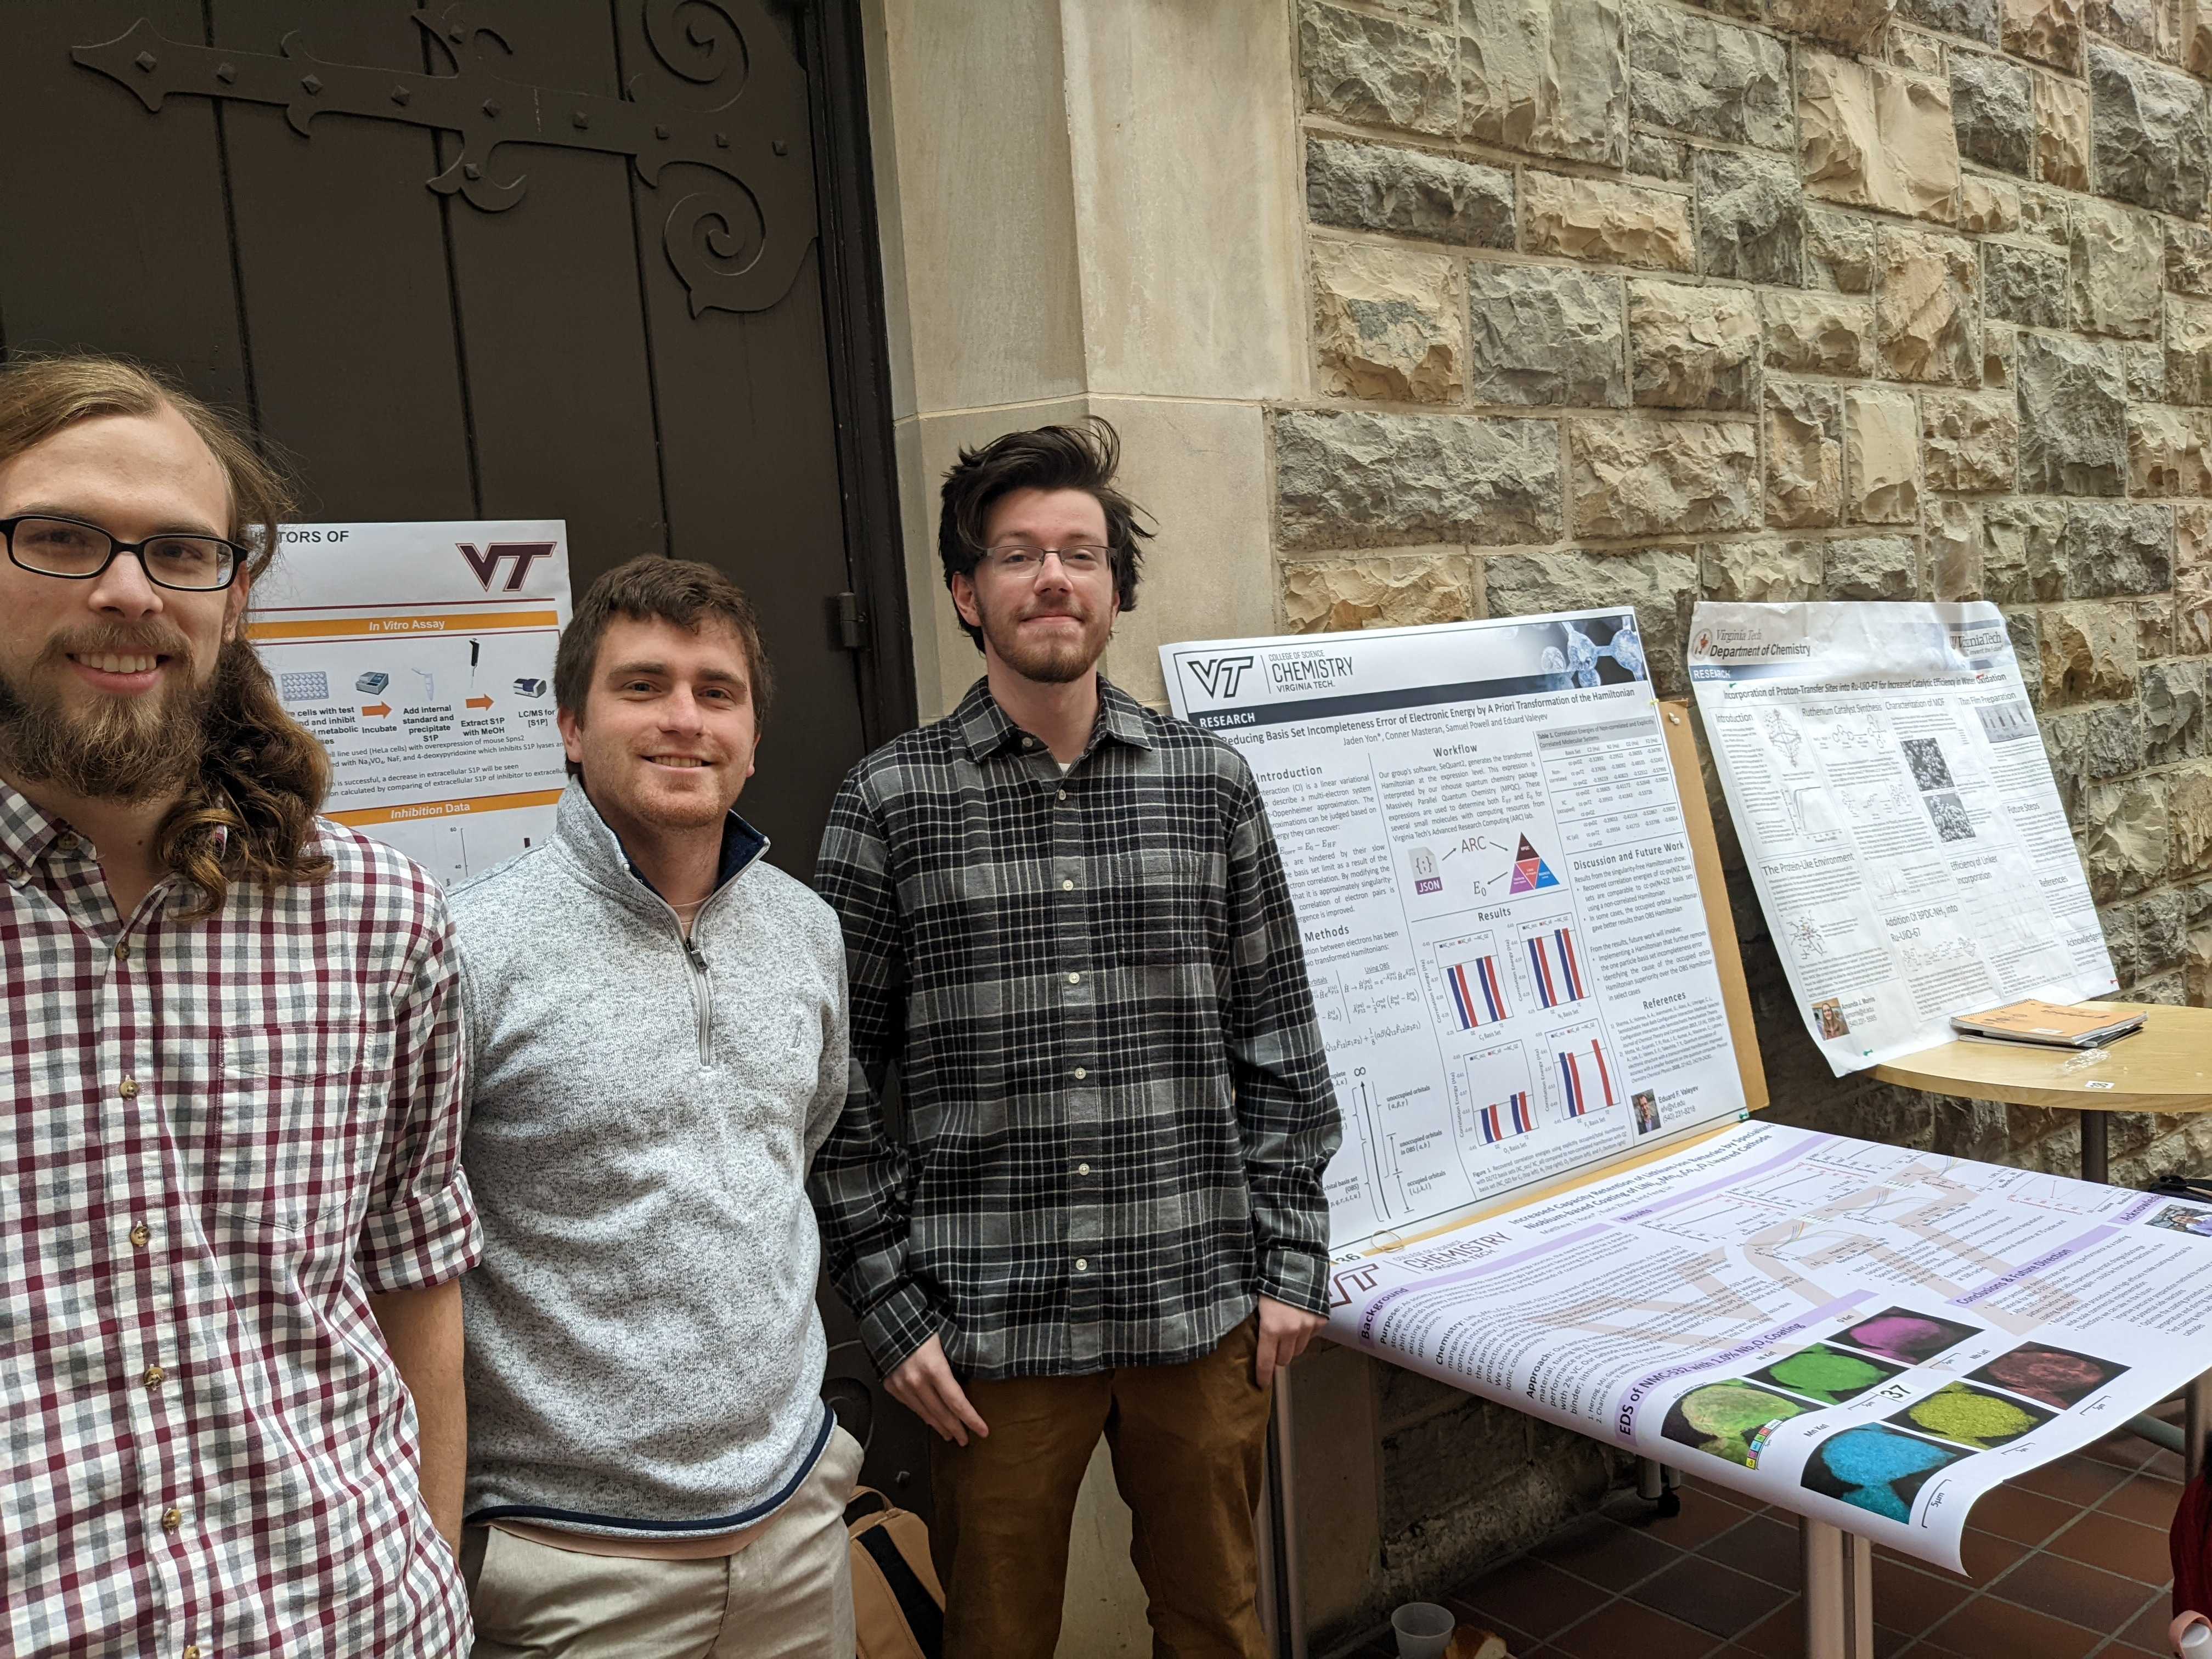 Jaden Yon and coworkers by the research poster